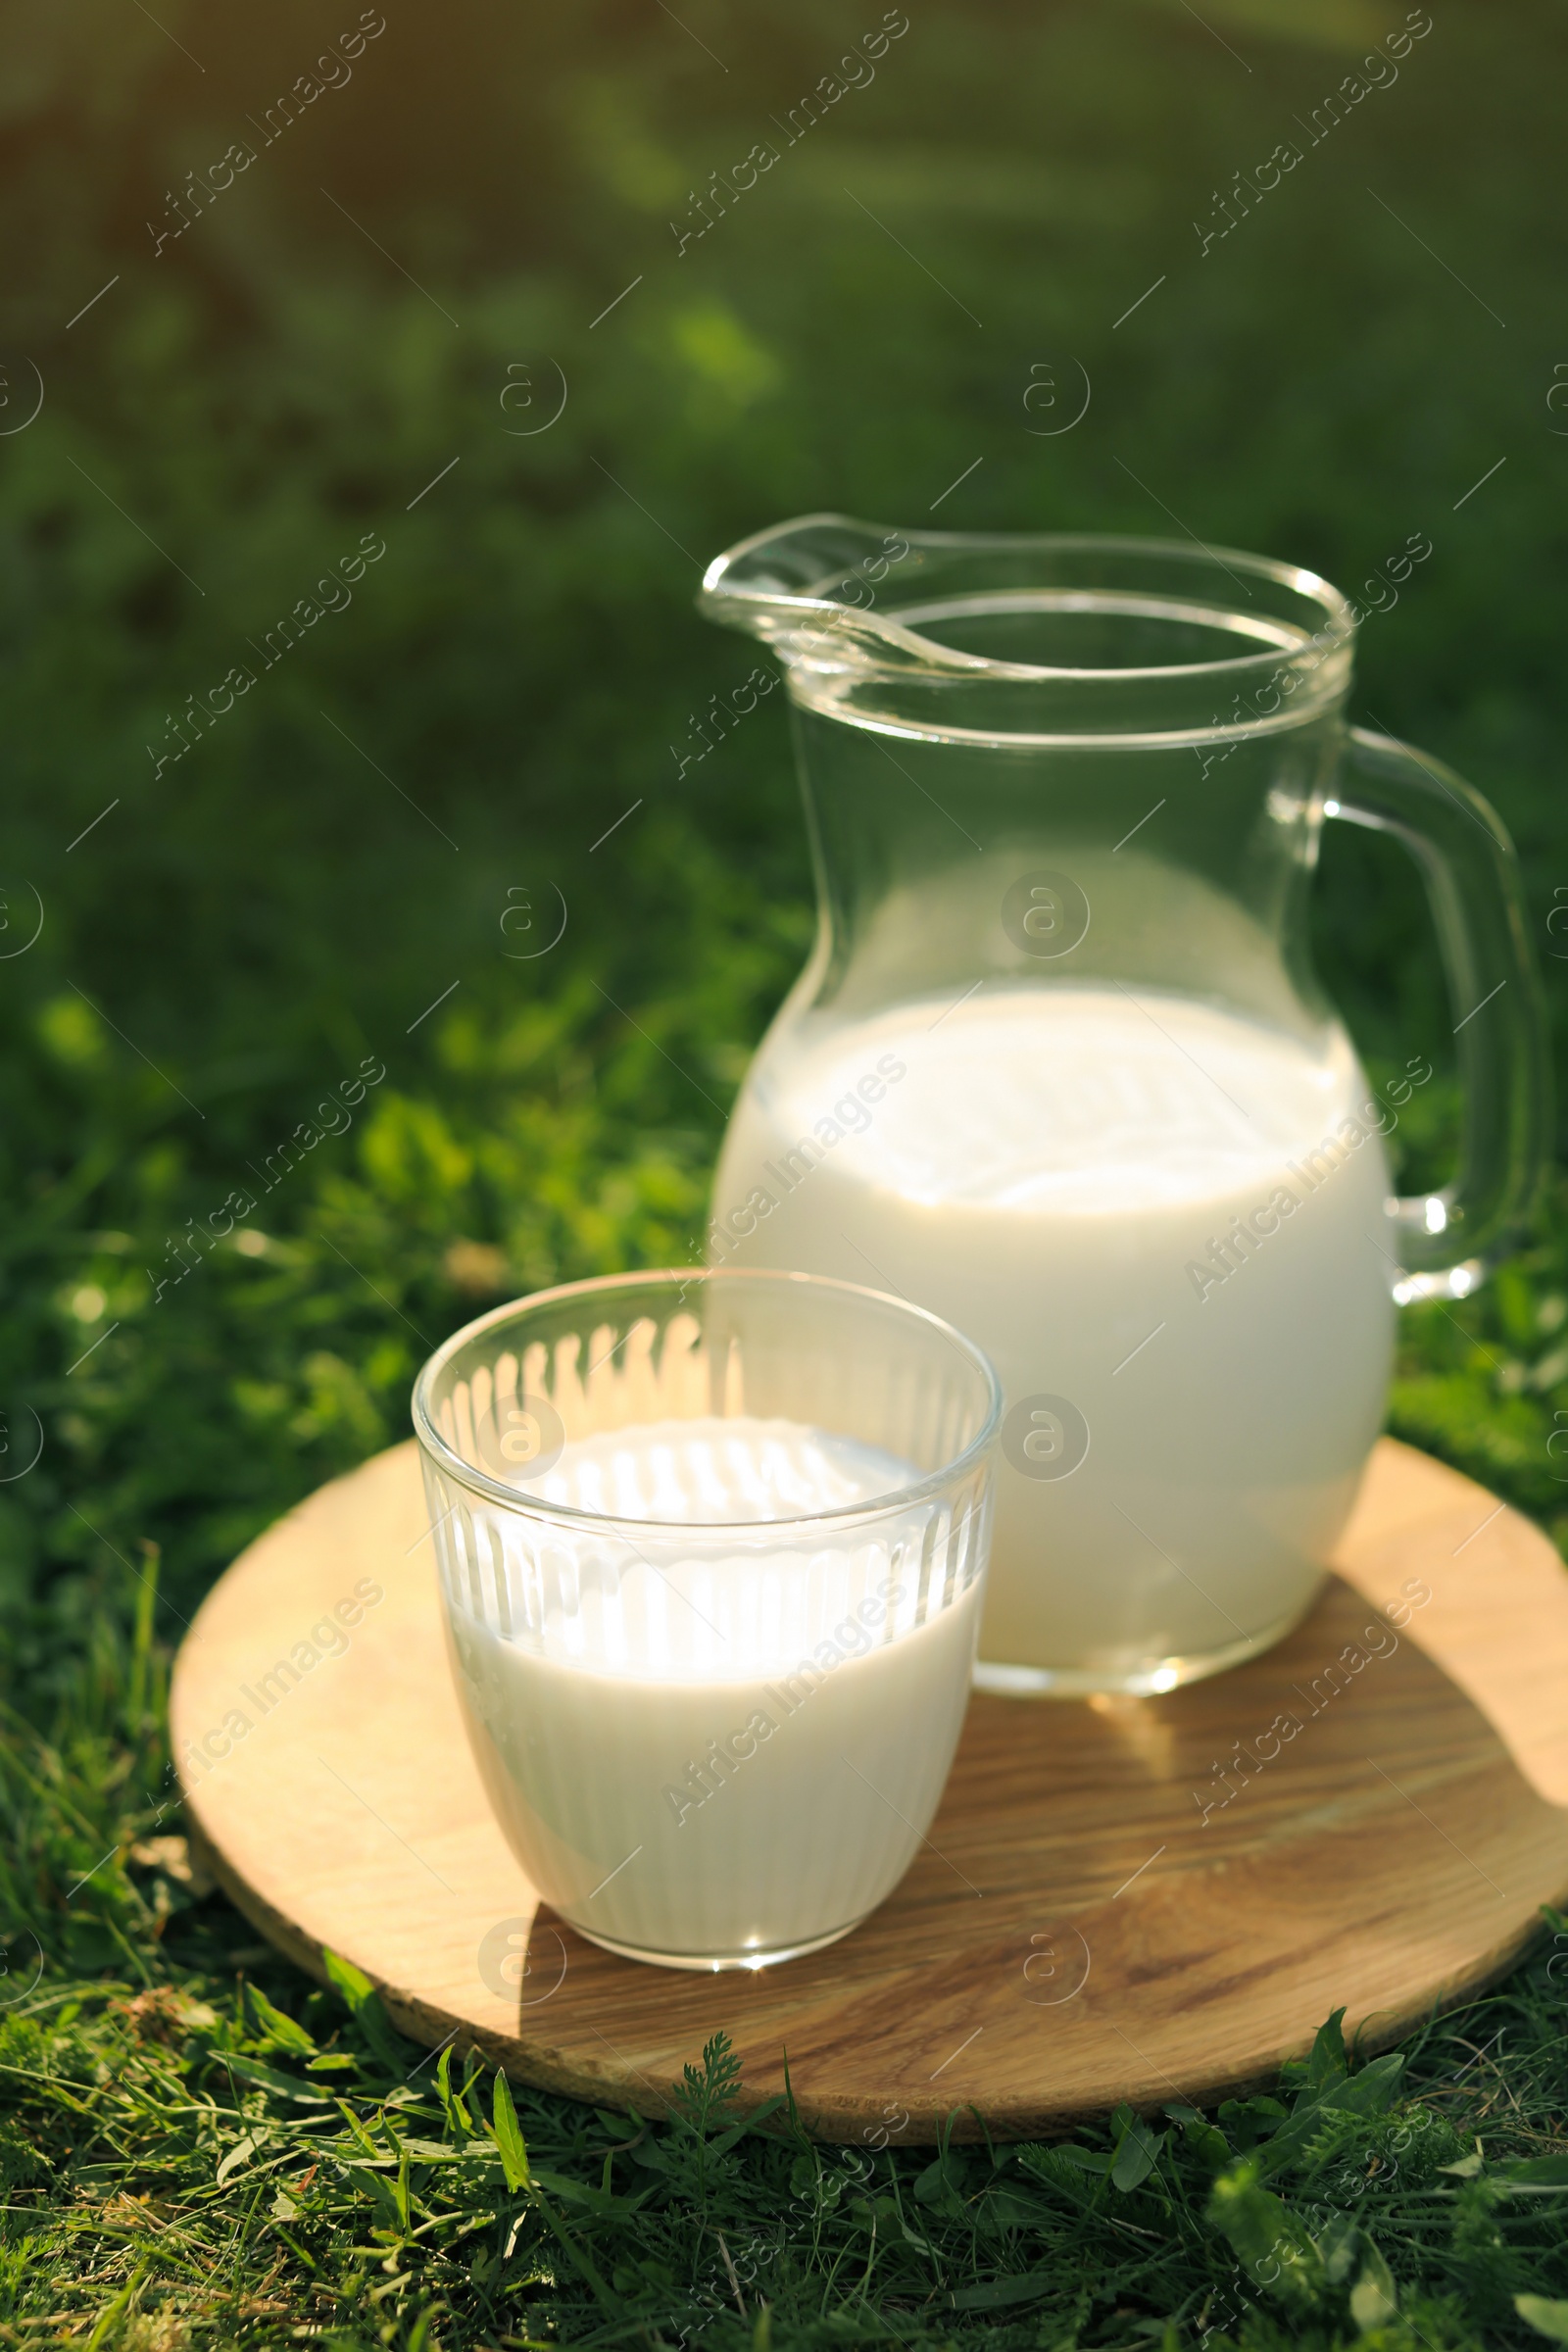 Photo of Jug and glass of tasty fresh milk on green grass outdoors